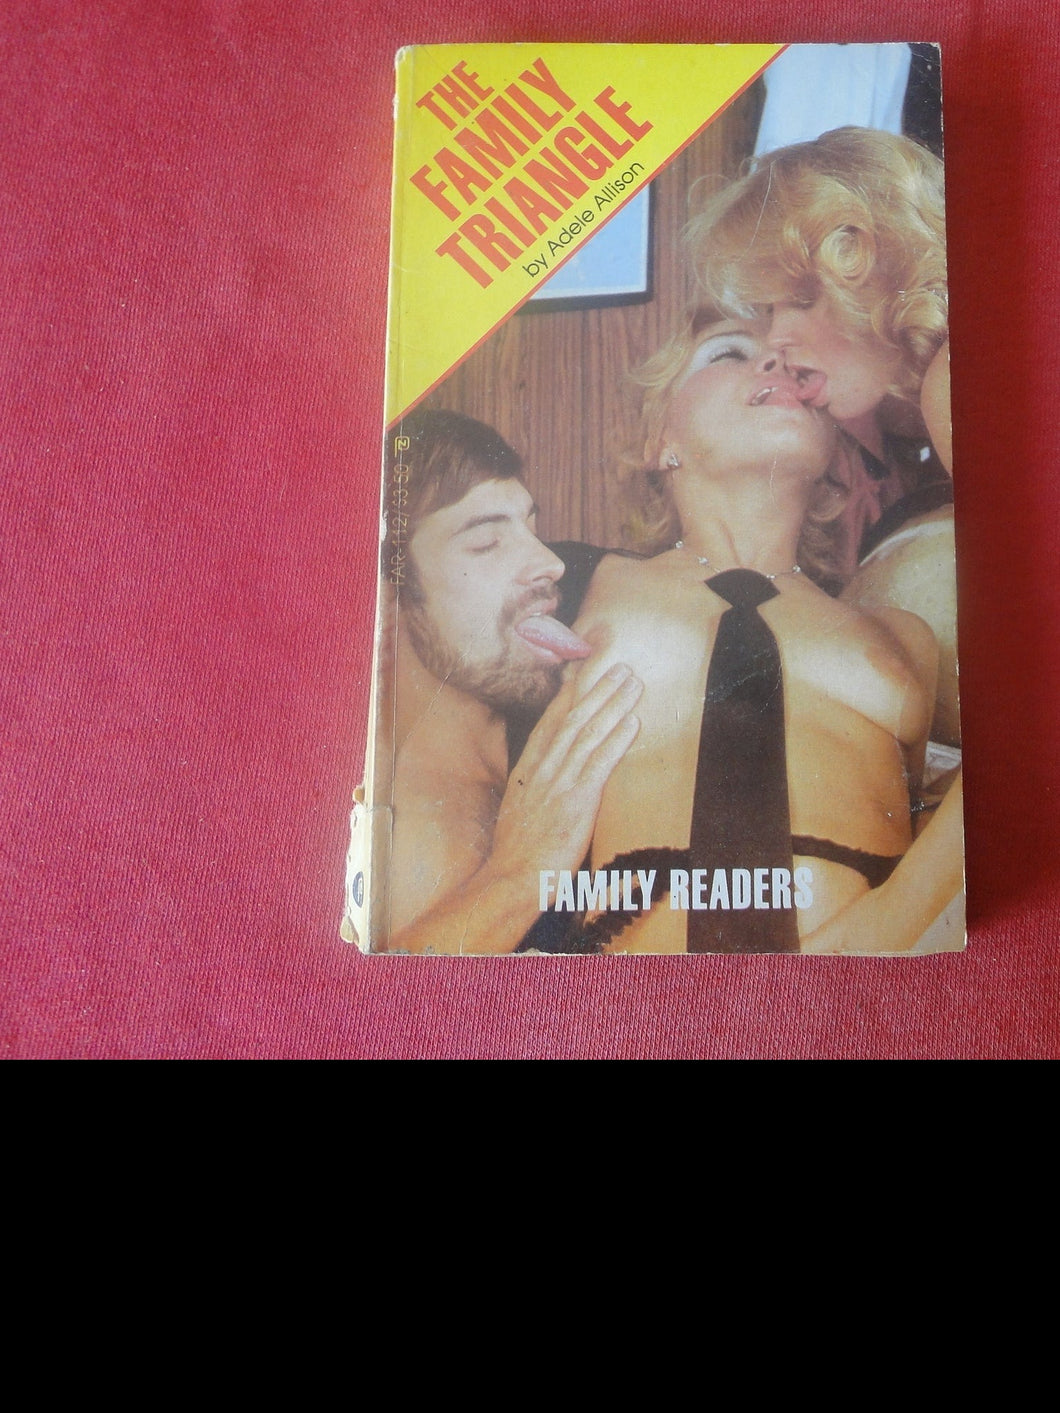 Vintage Adult Paperback Novel/Book The Family Triangle ROUGH      PB5